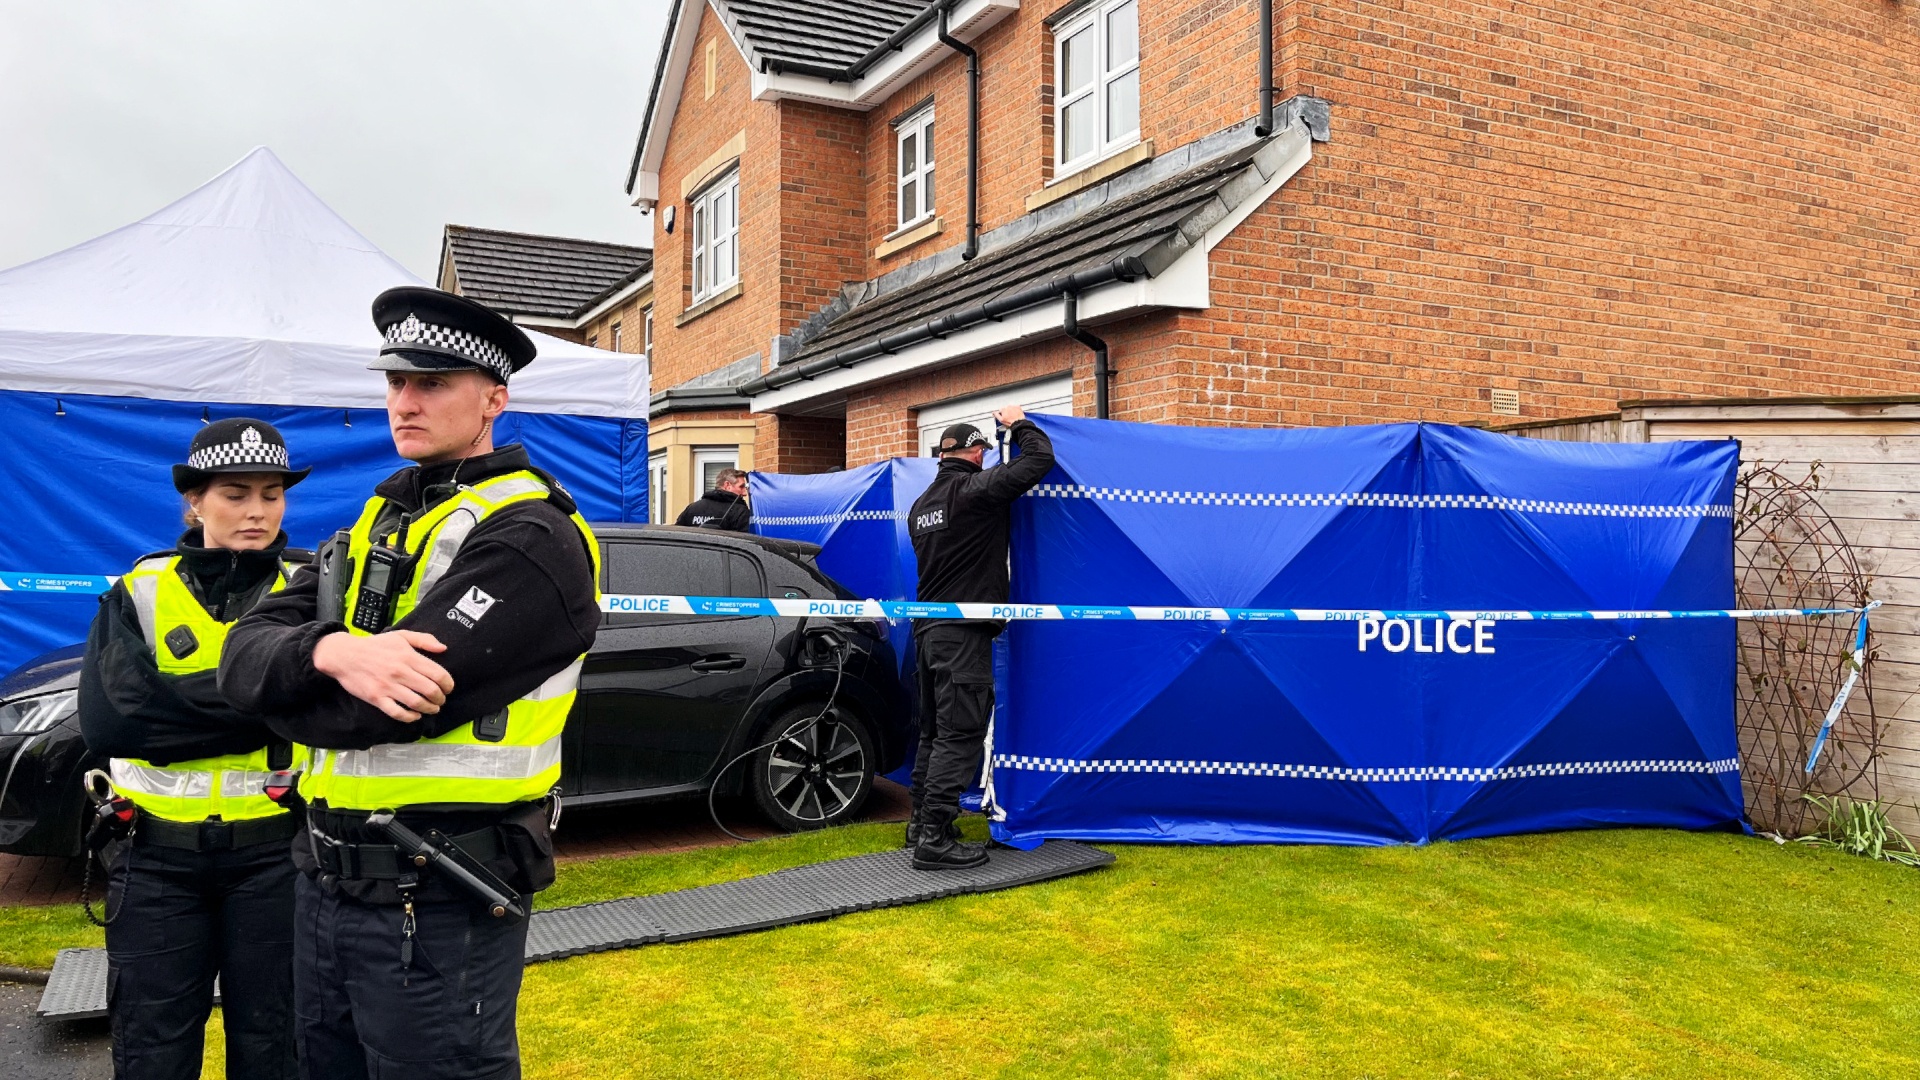 Police spent two days searching Nicola Sturgeon and Peter Murrell's home in Glasgow.